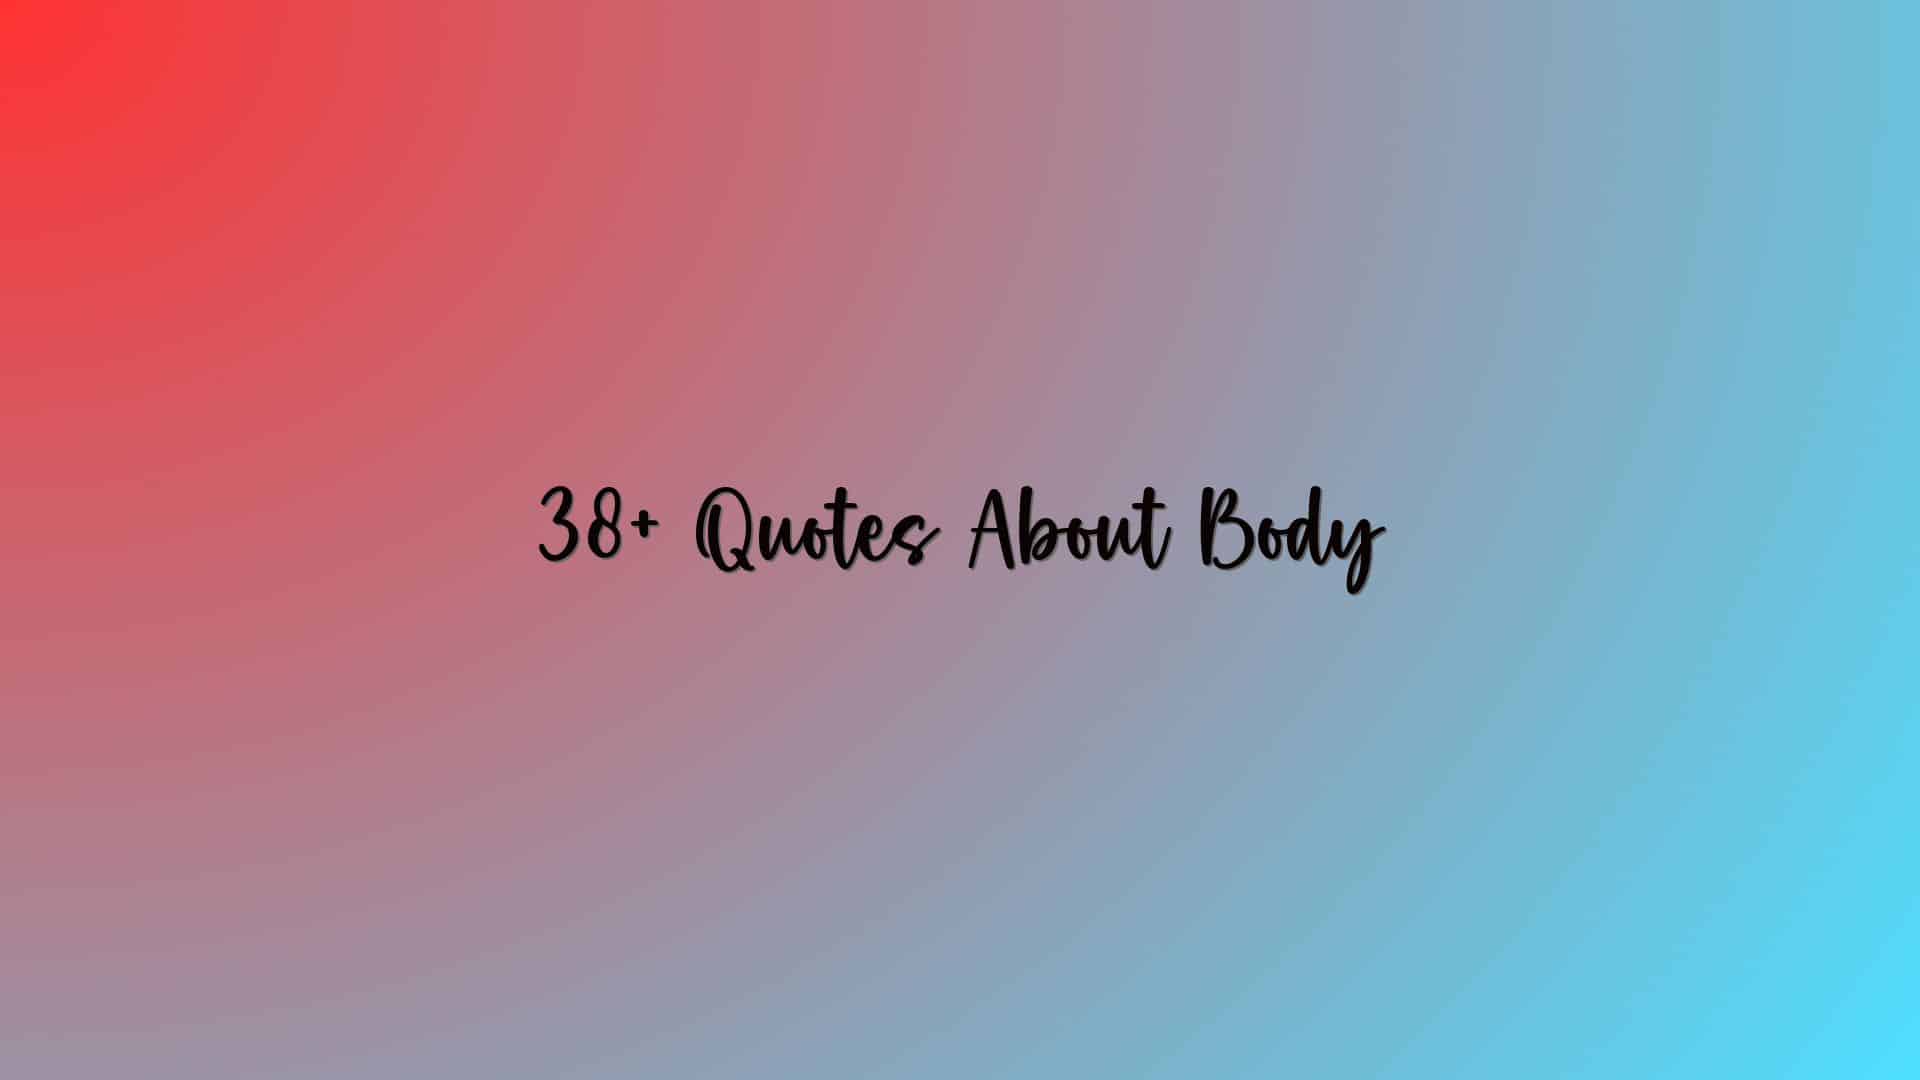 38+ Quotes About Body